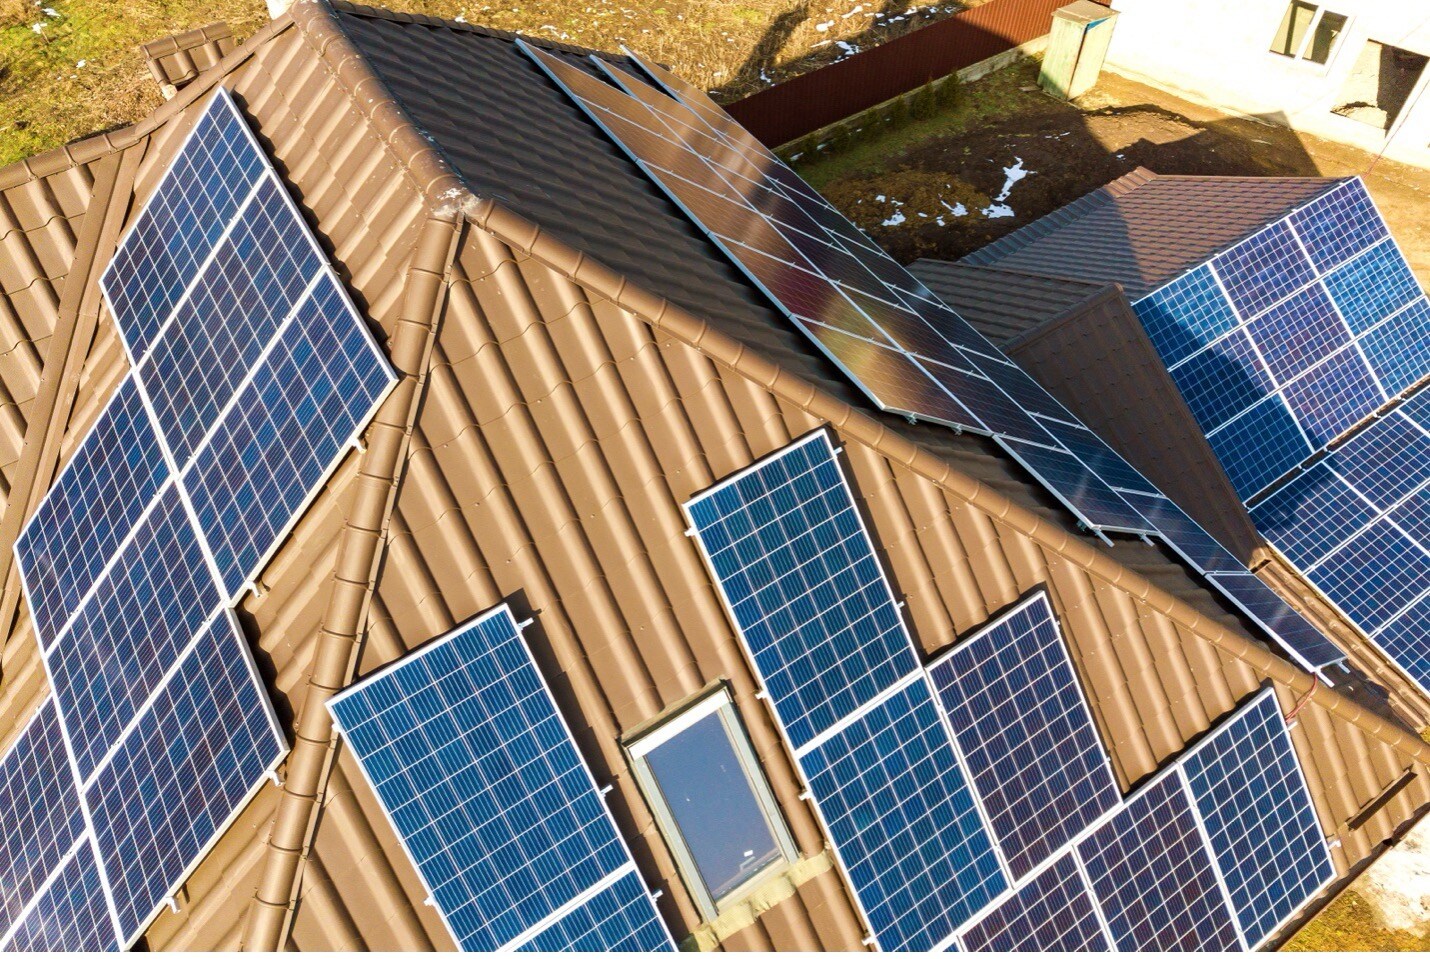 Read: My Solar Installer Went Out of Business but I Need My Roof Repaired